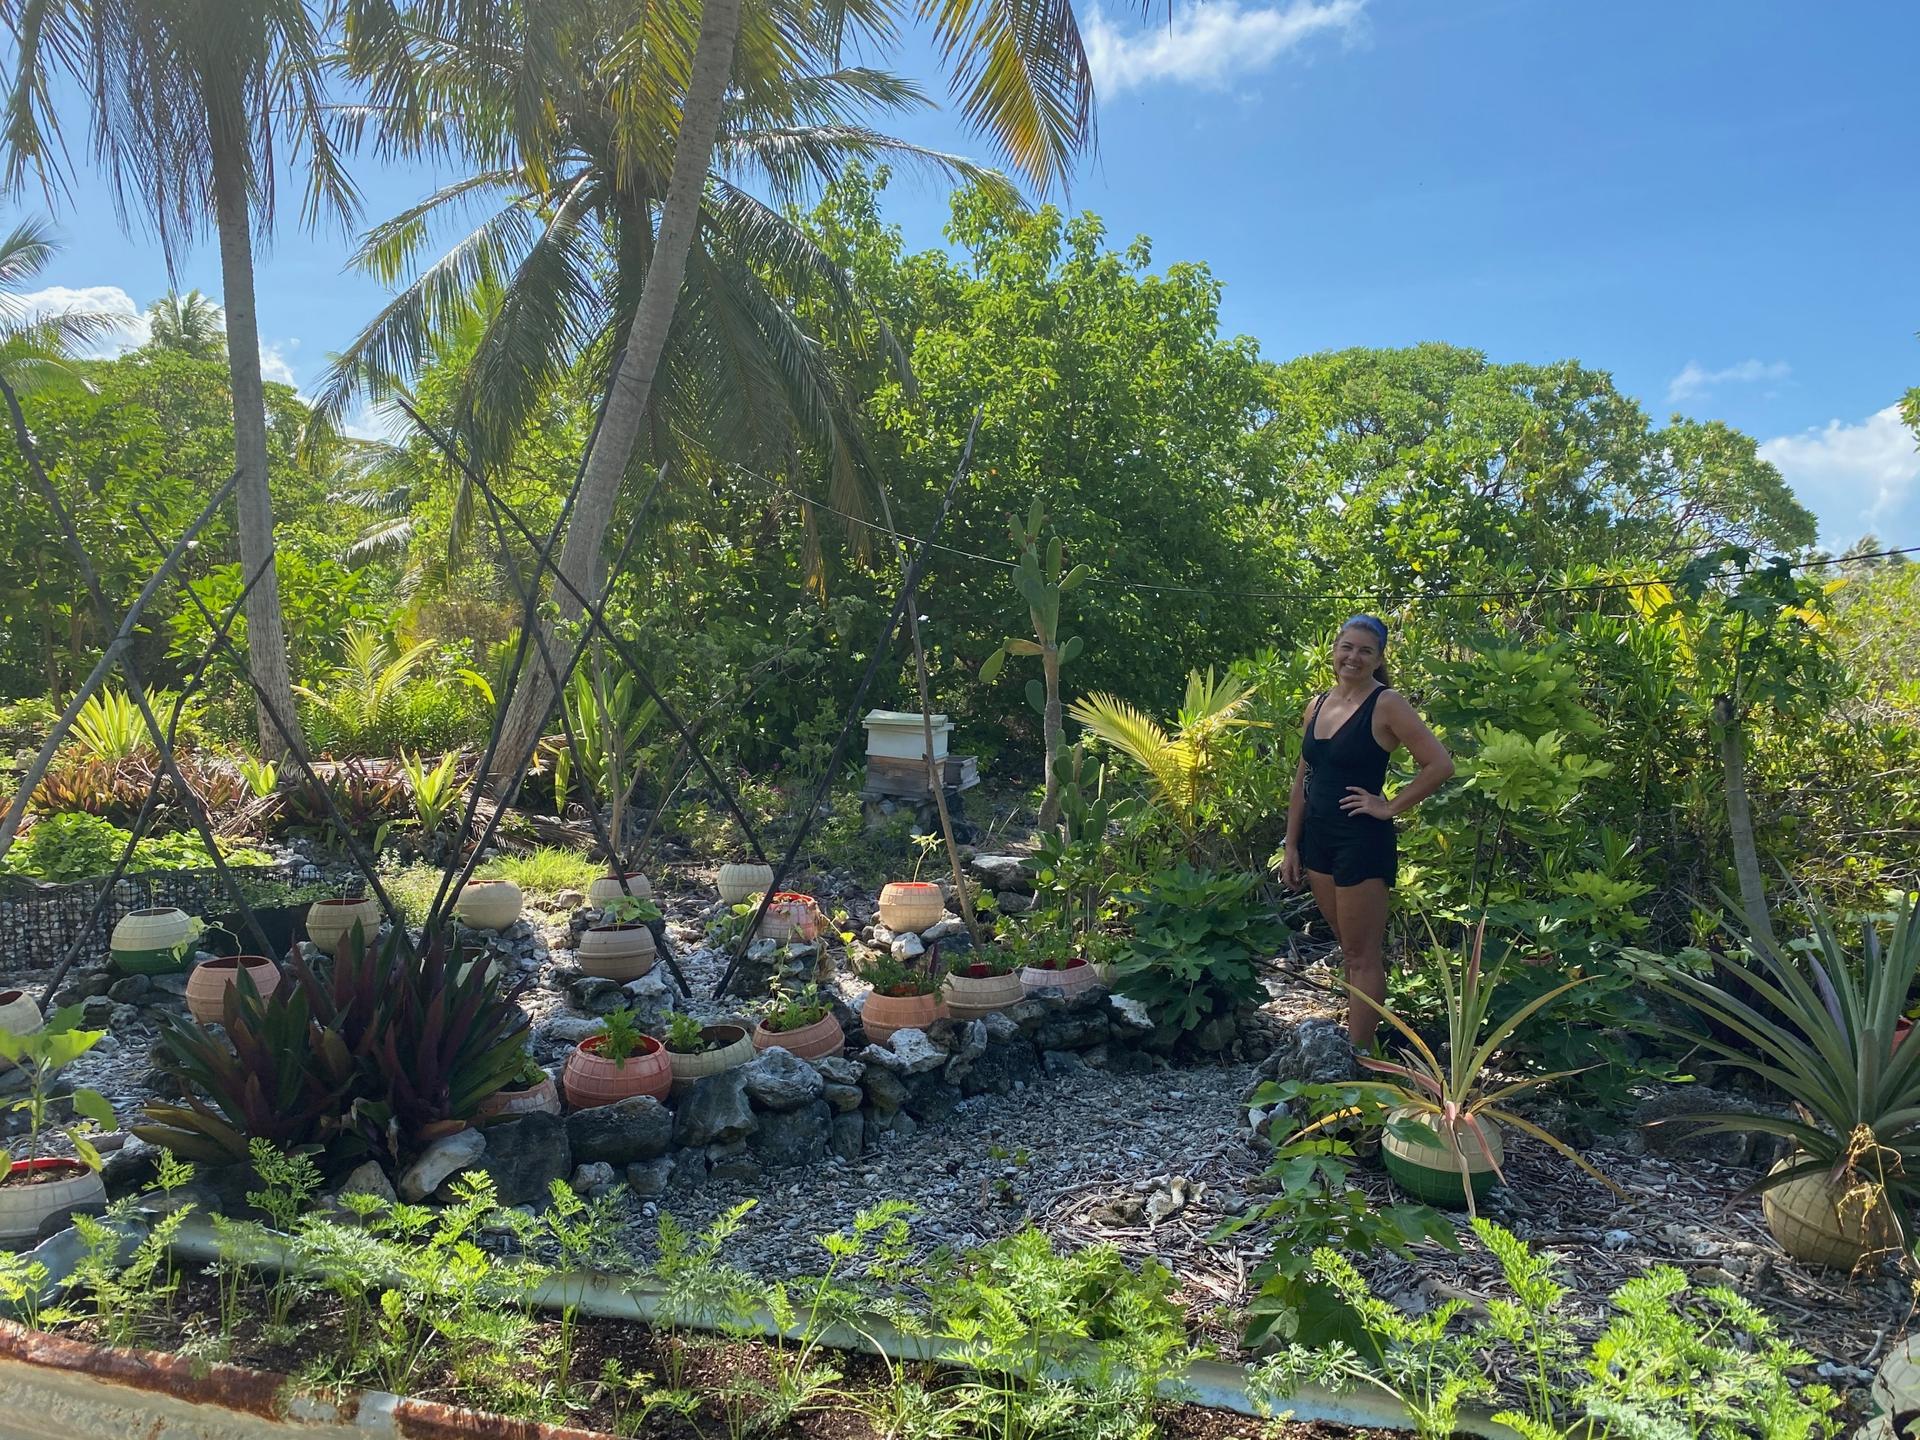 Kamoka Pearl co-owner Celeste Brash stands in front of a portion of the large garden that helps feed the farm crew. In soil made from bird droppings and coconut husks, they're attempting to grow everything from arugula and pineapples to taro and carrots i